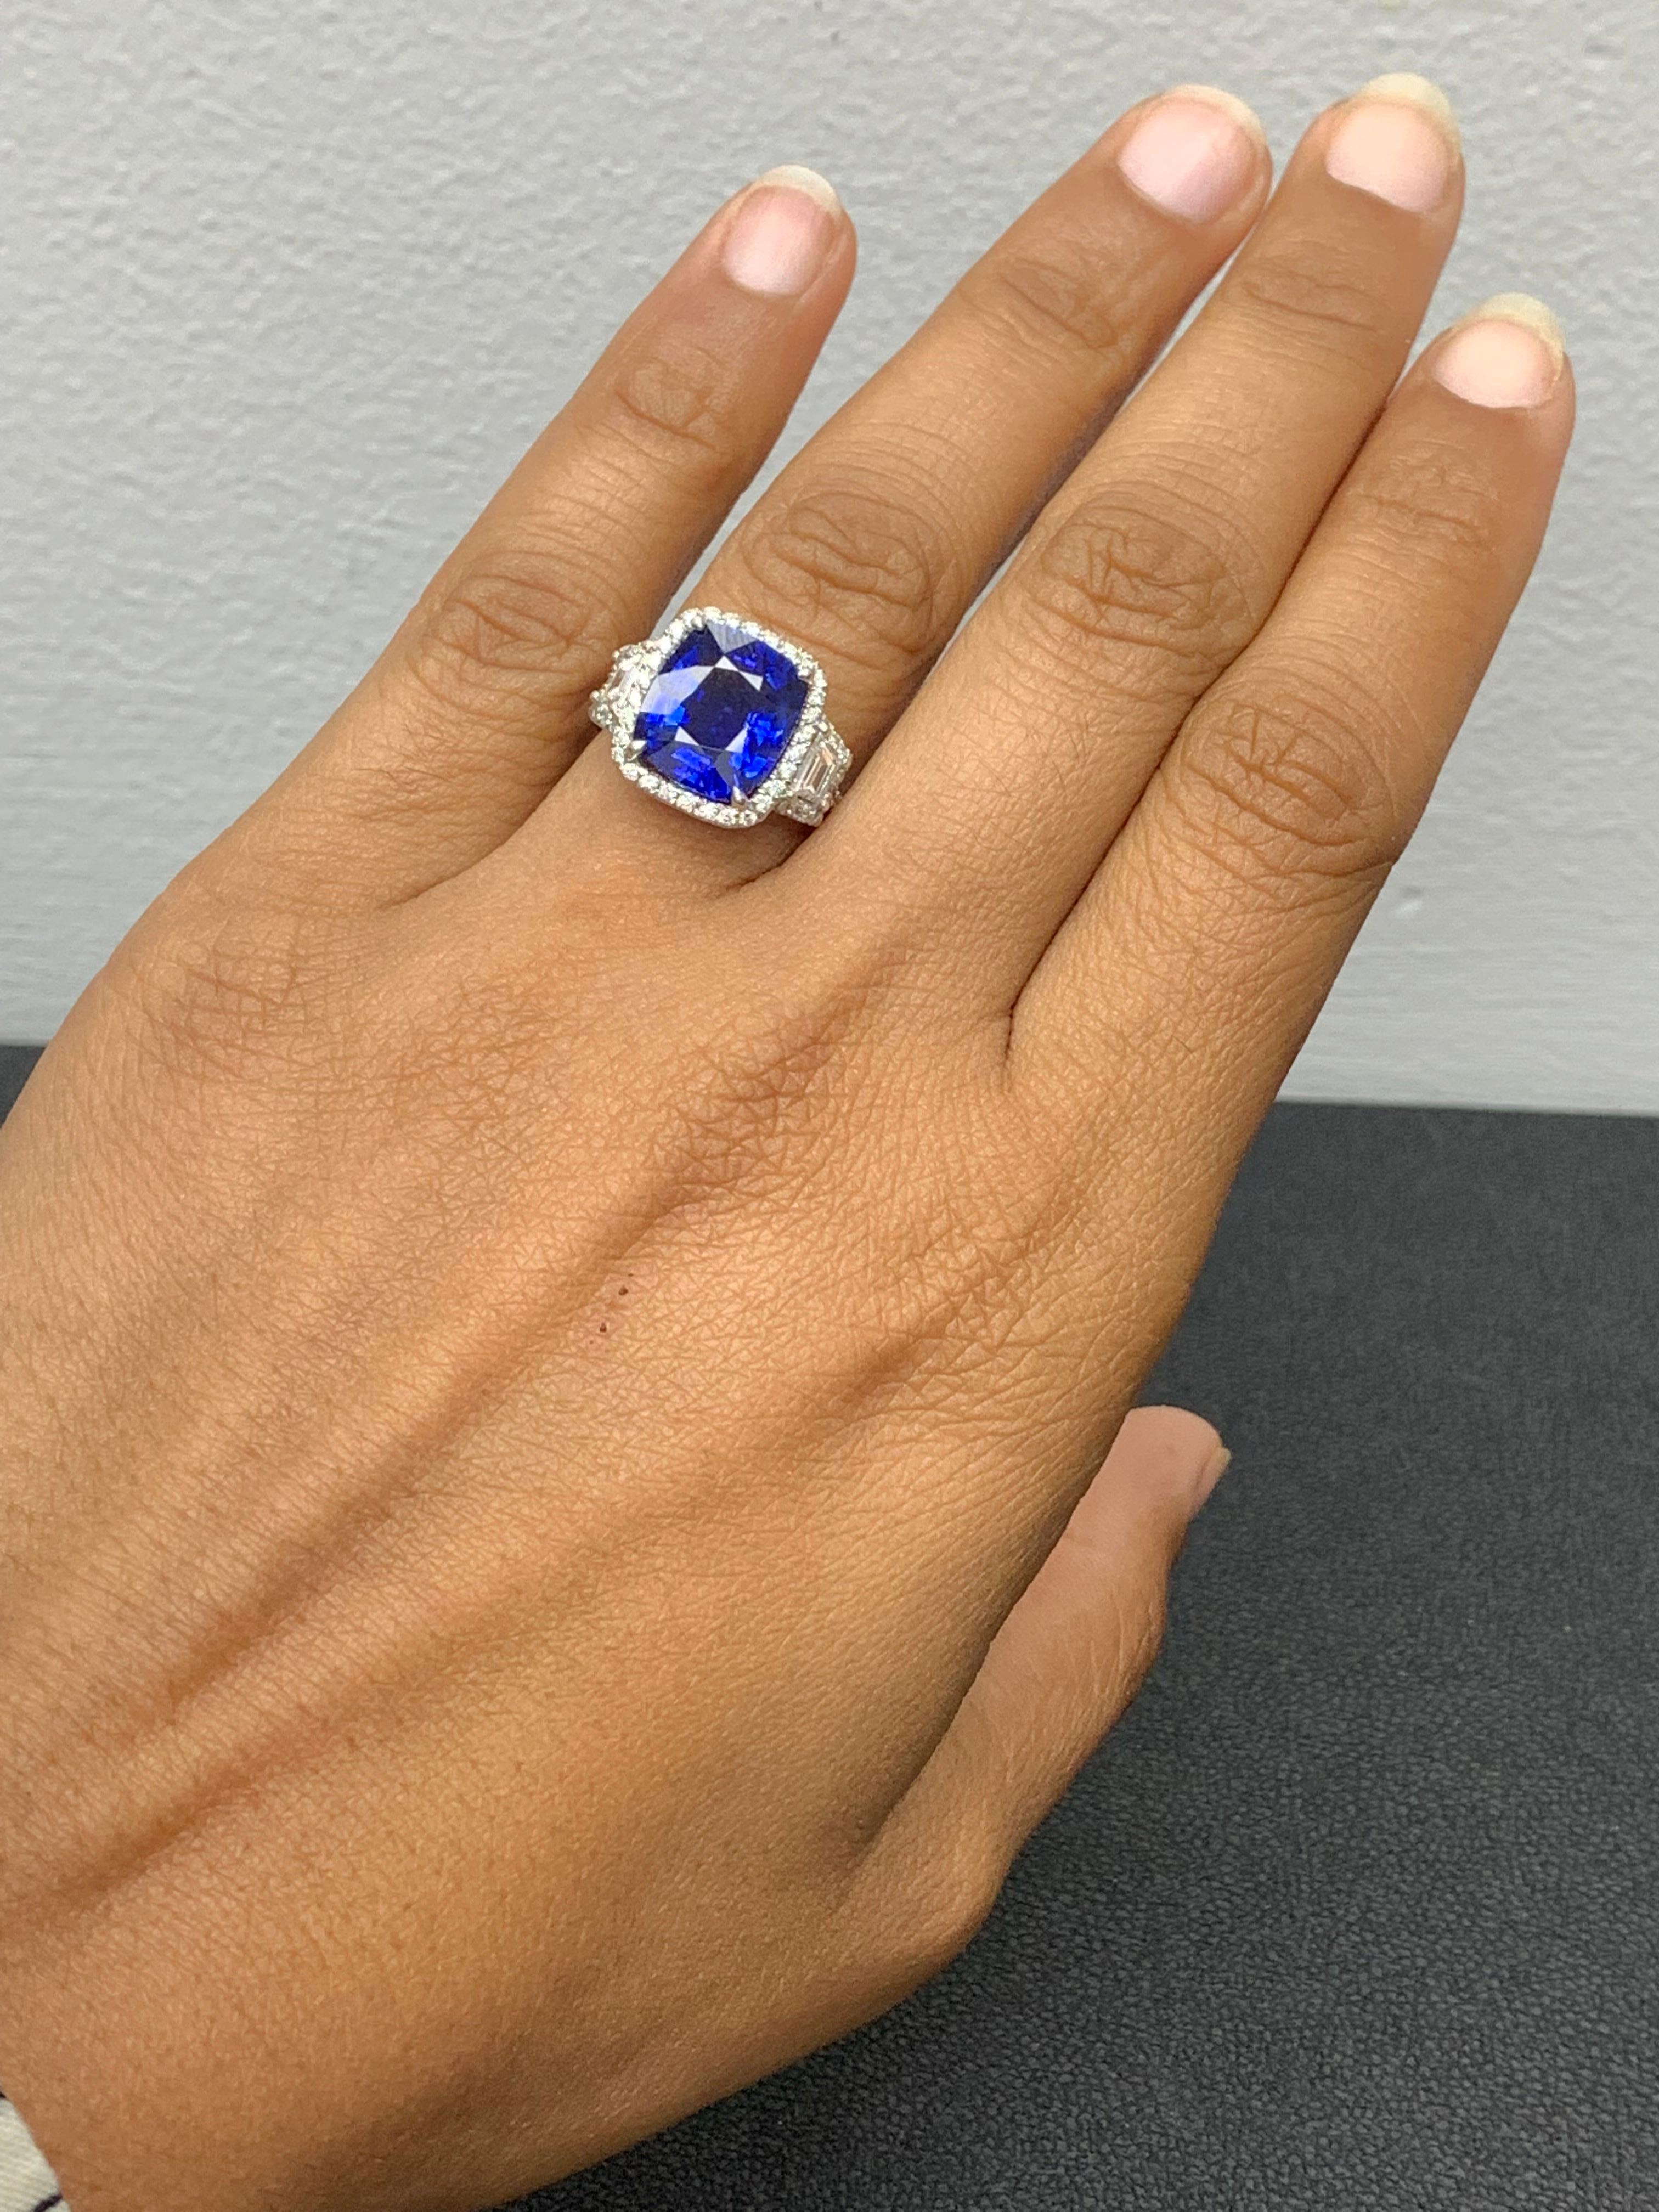 Certified 5.76 Carat Cushion Cut Sapphire Diamond 3 Stone Ring in Platinum For Sale 3